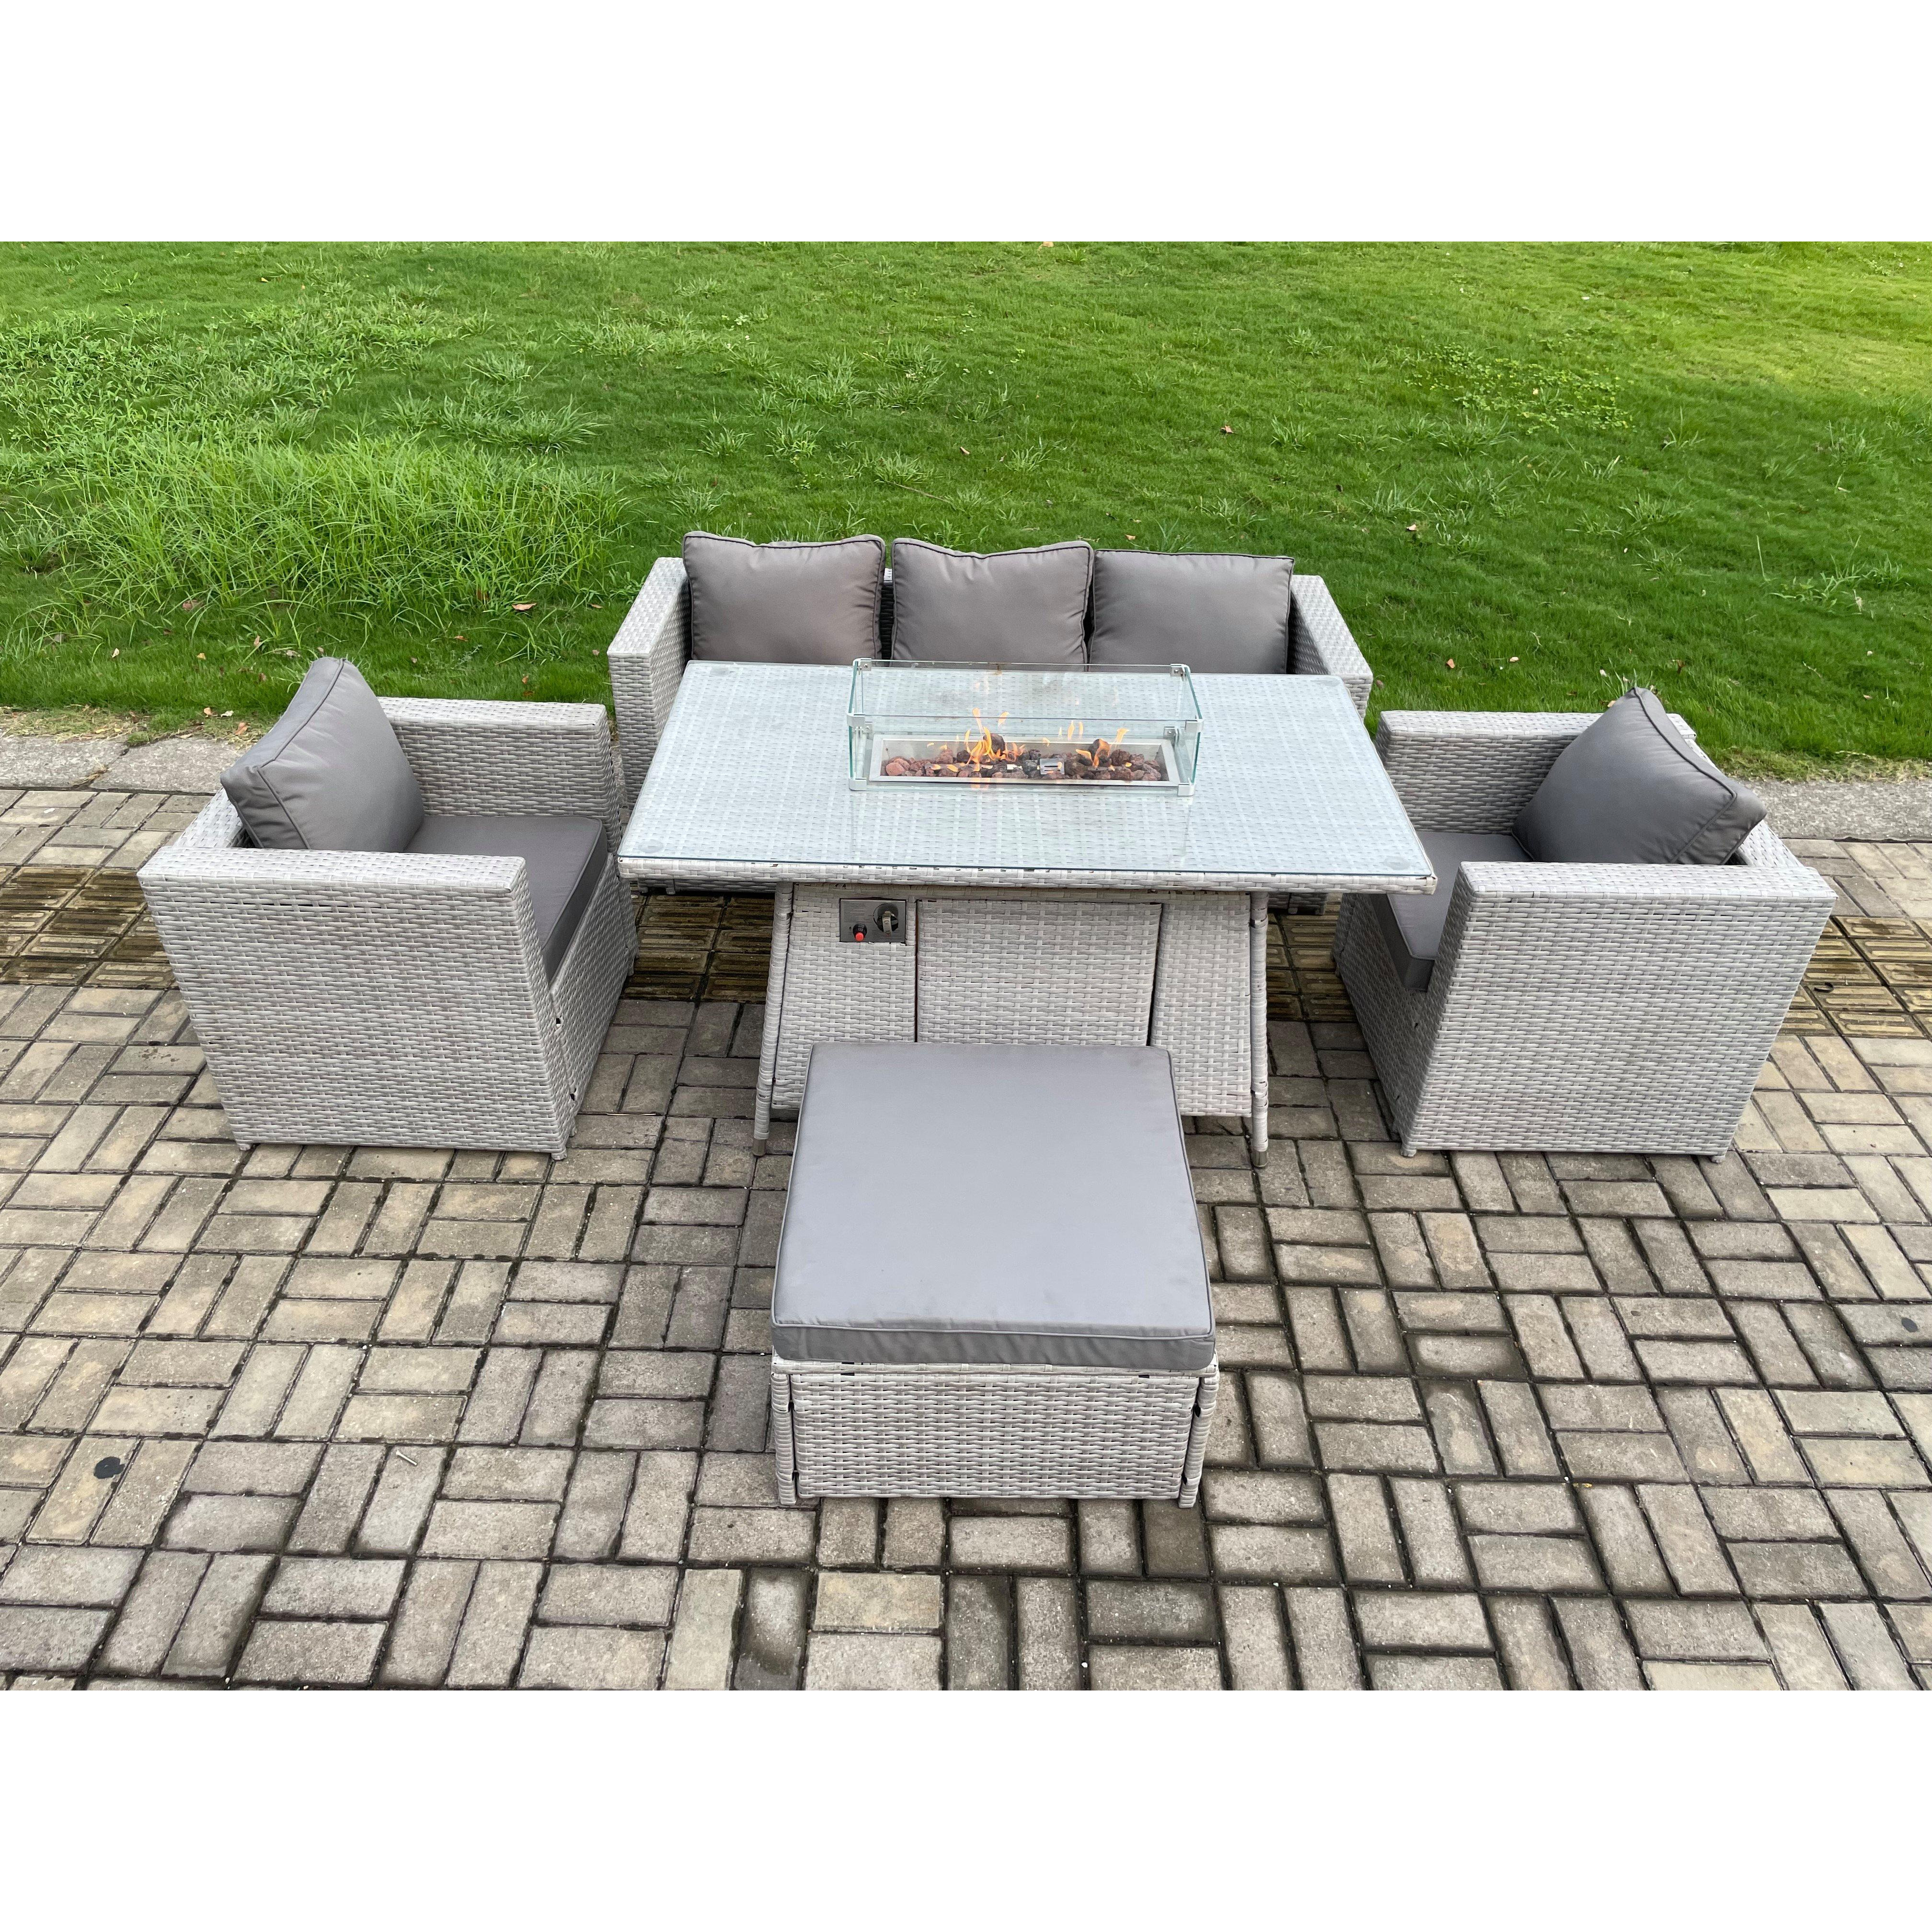 Outdoor PE Rattan Garden Furniture Gas Fire Pit Dining Table Armchairs With Big Footstool Light Grey - image 1